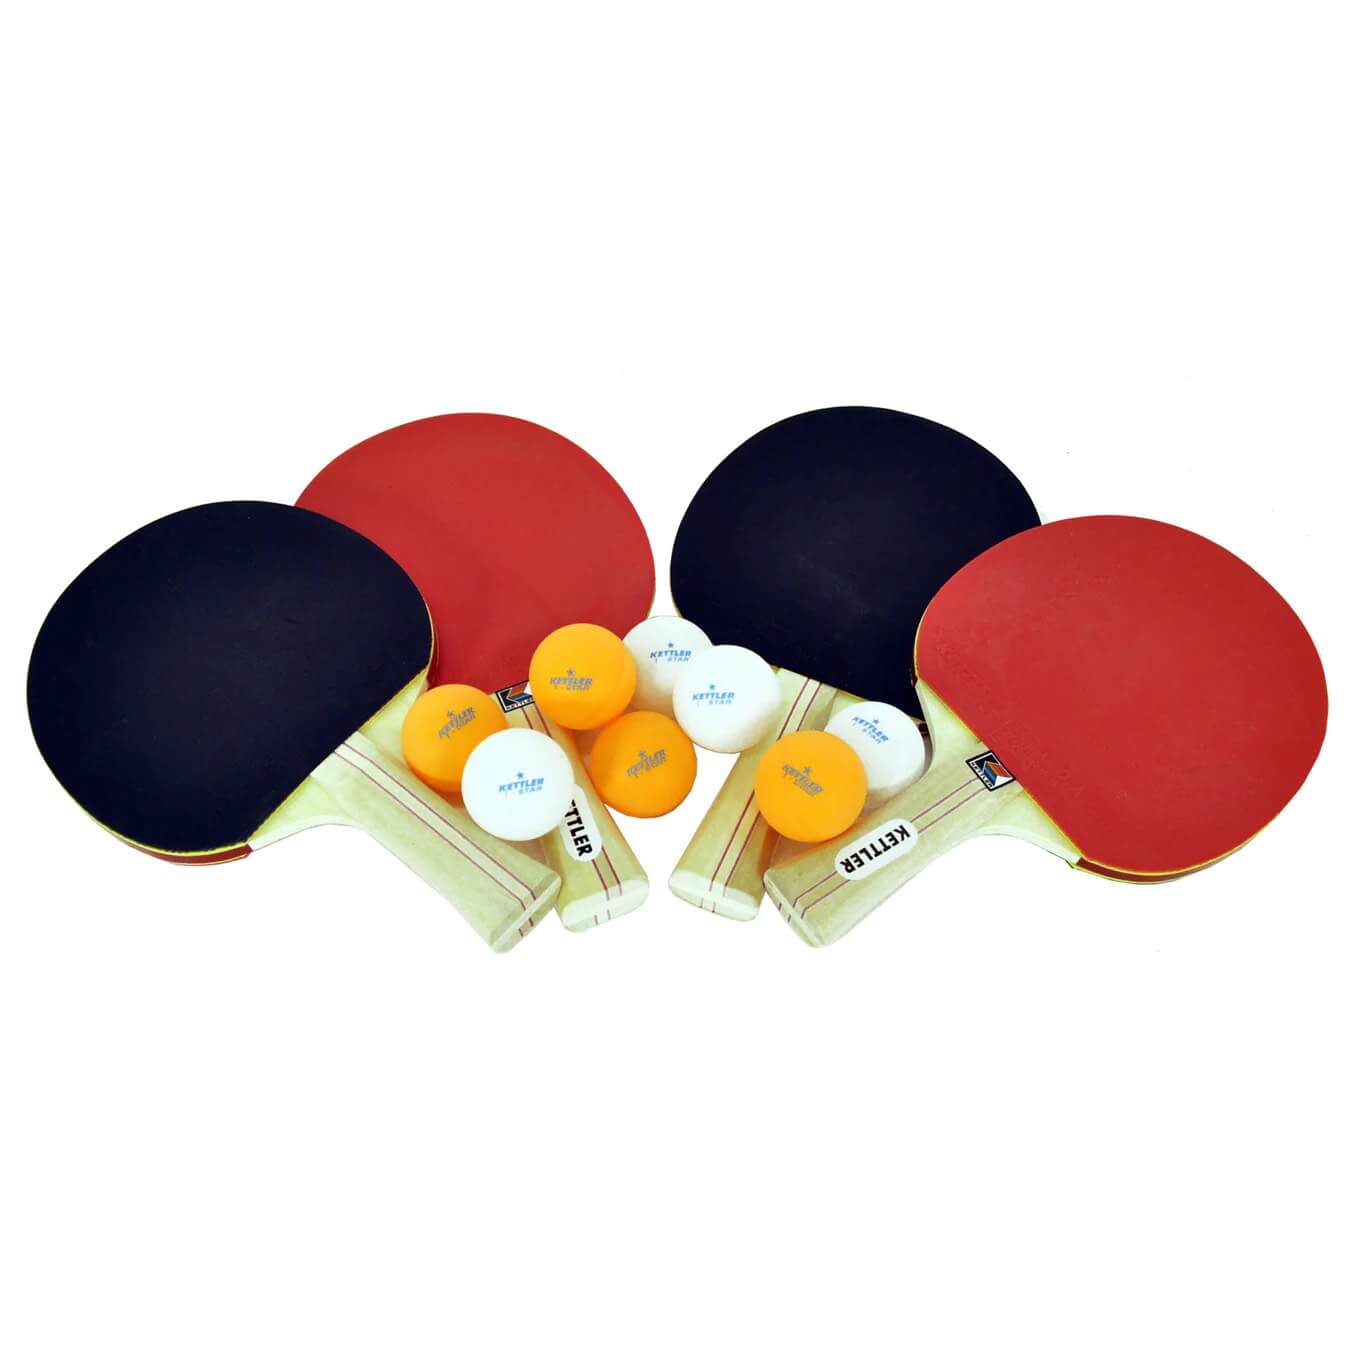 Kettler USA ADVANTAGE 4-PLAYER Ping Pong Table Tennis Accessory Paddle Set, 7244-100